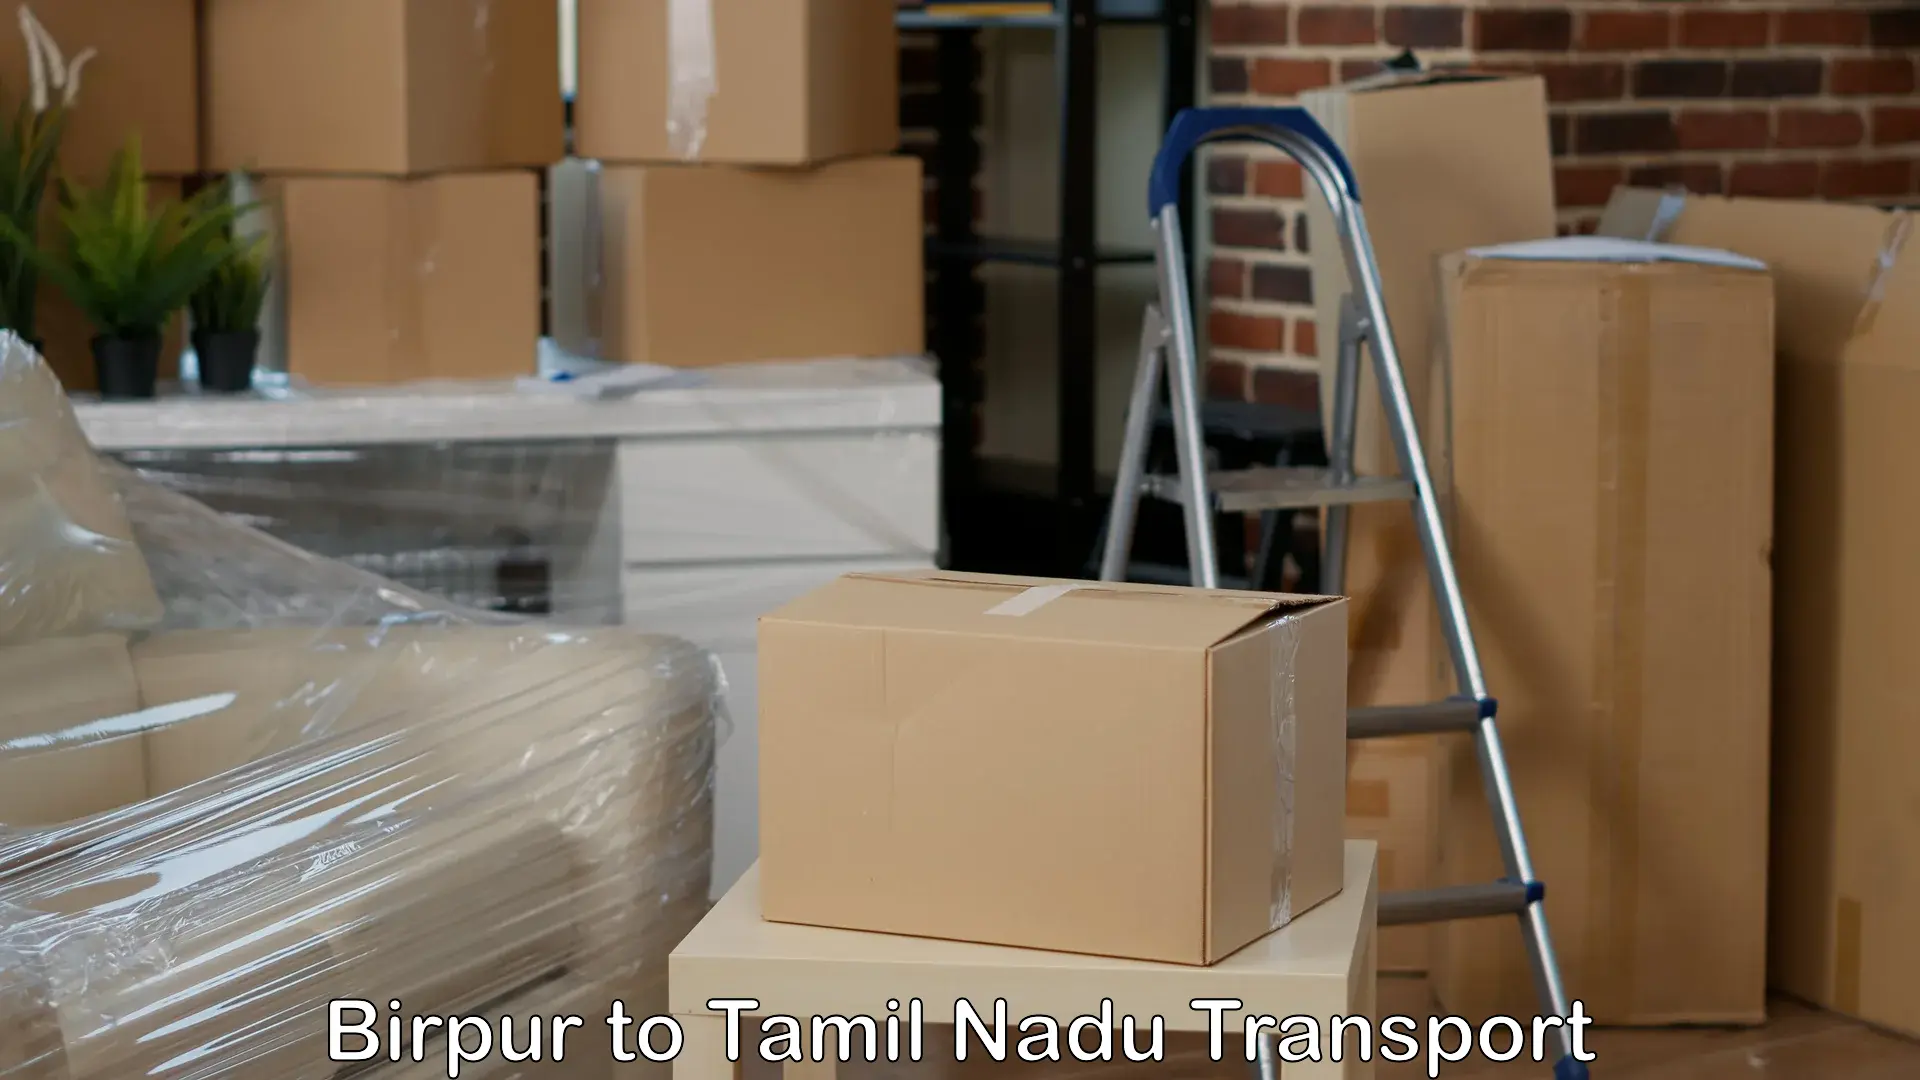 Domestic goods transportation services Birpur to Omalur